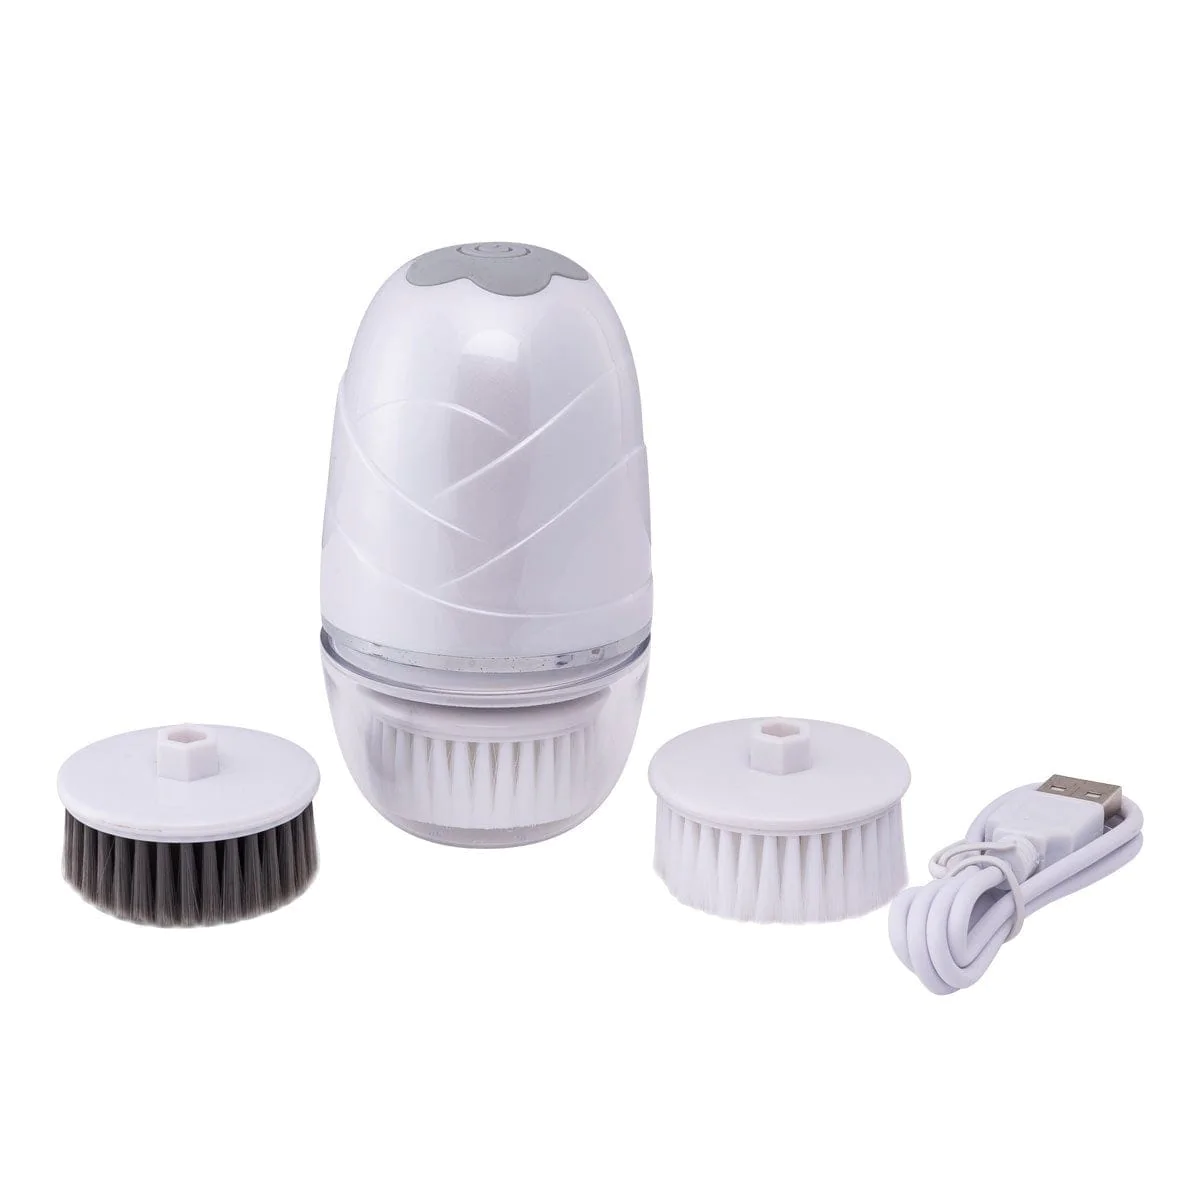 505208_Rechargeable_Sonic_Cleansing_Brush_497a81fd-7e04-44b6-ad63-45af307ea48f.jpg